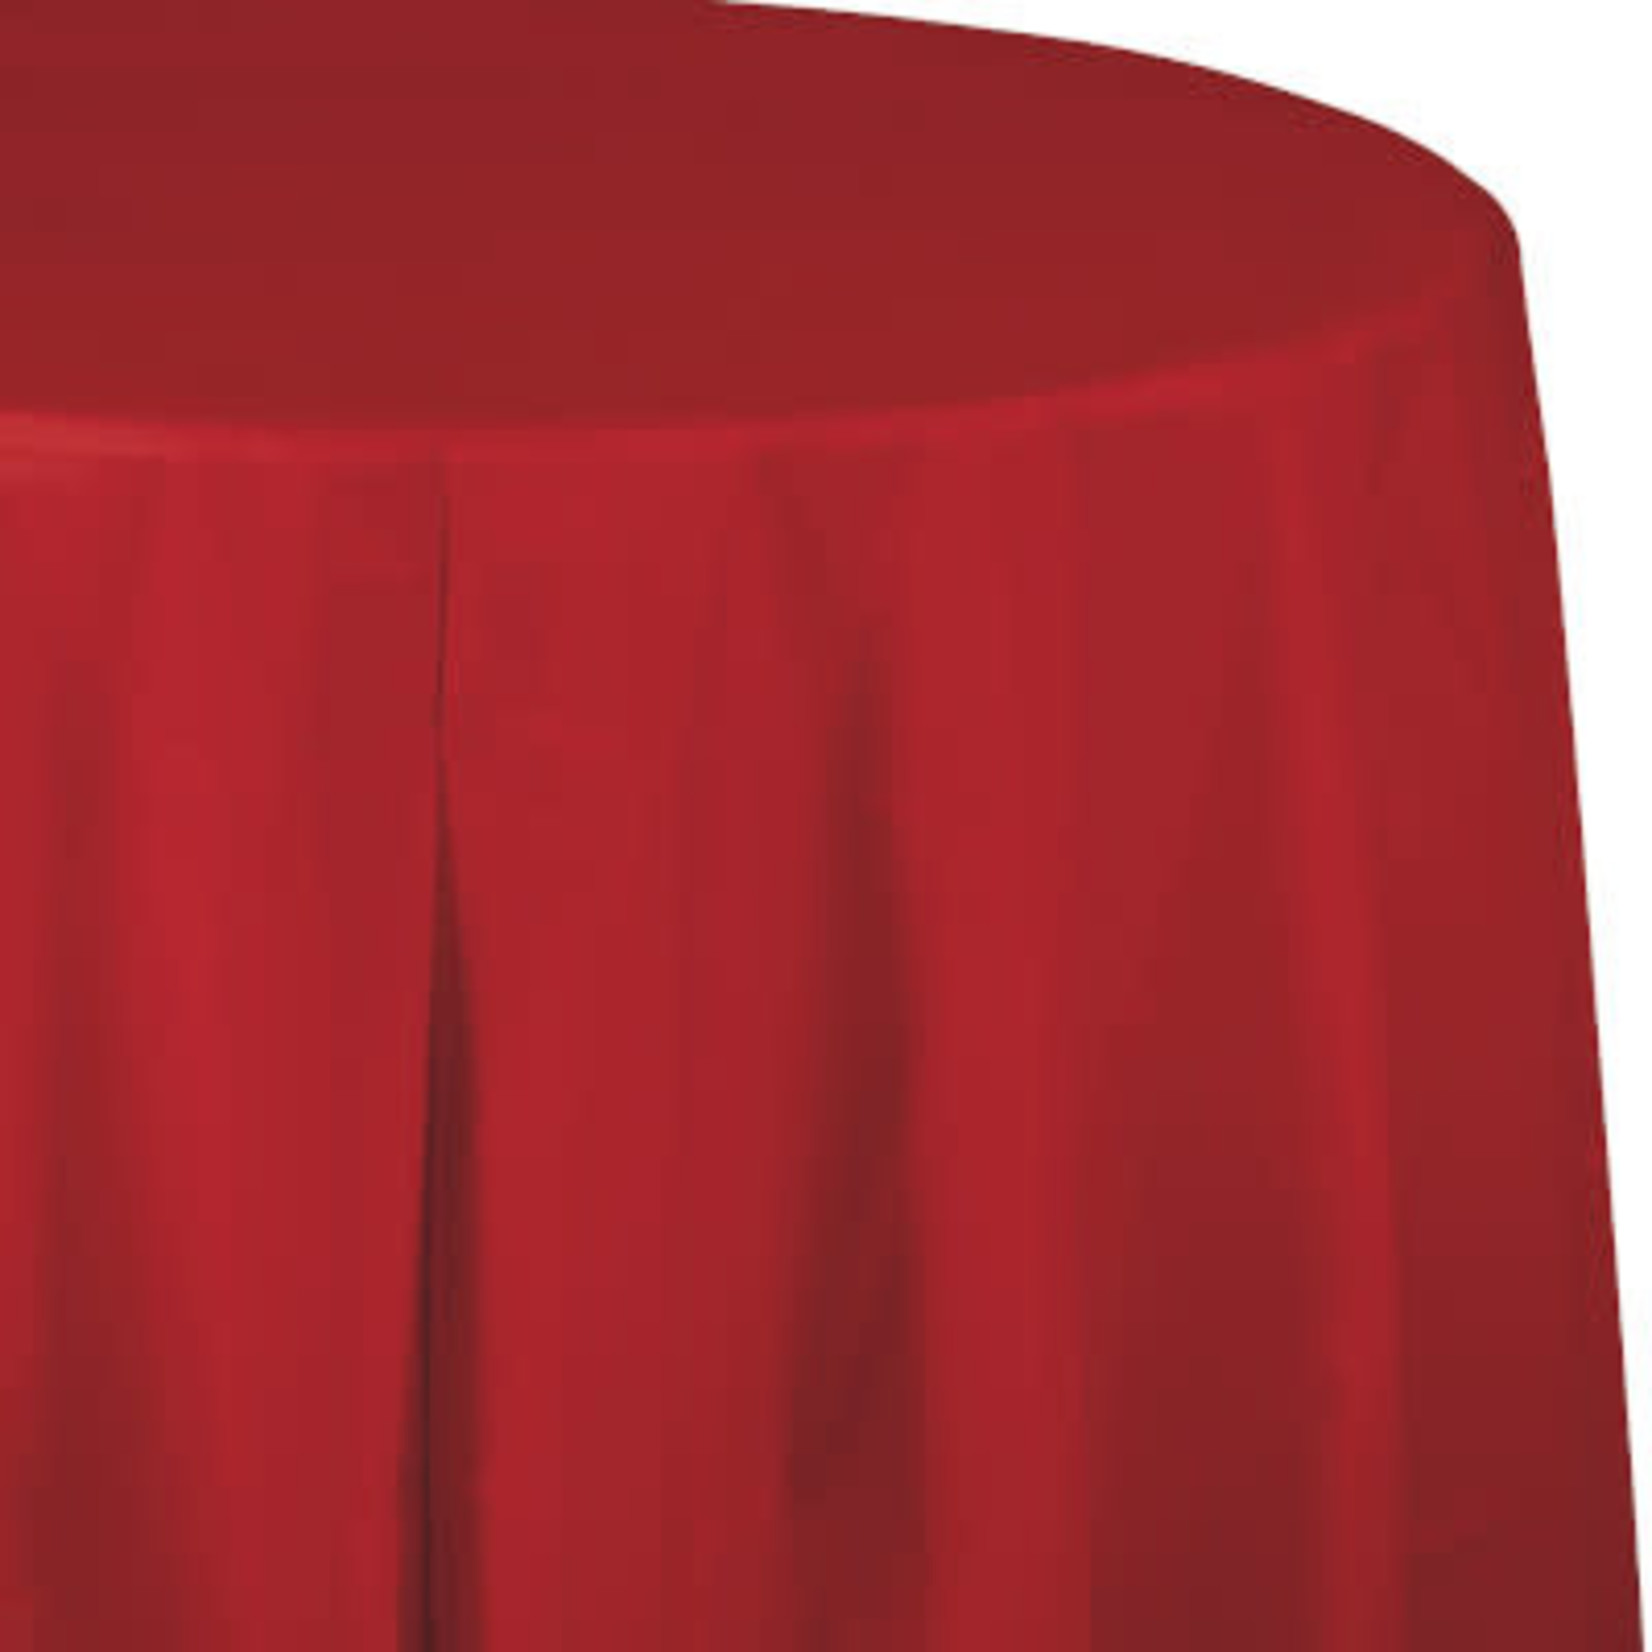 Touch of Color 82" Classic Red Round Plastic Tablecover - 1ct.